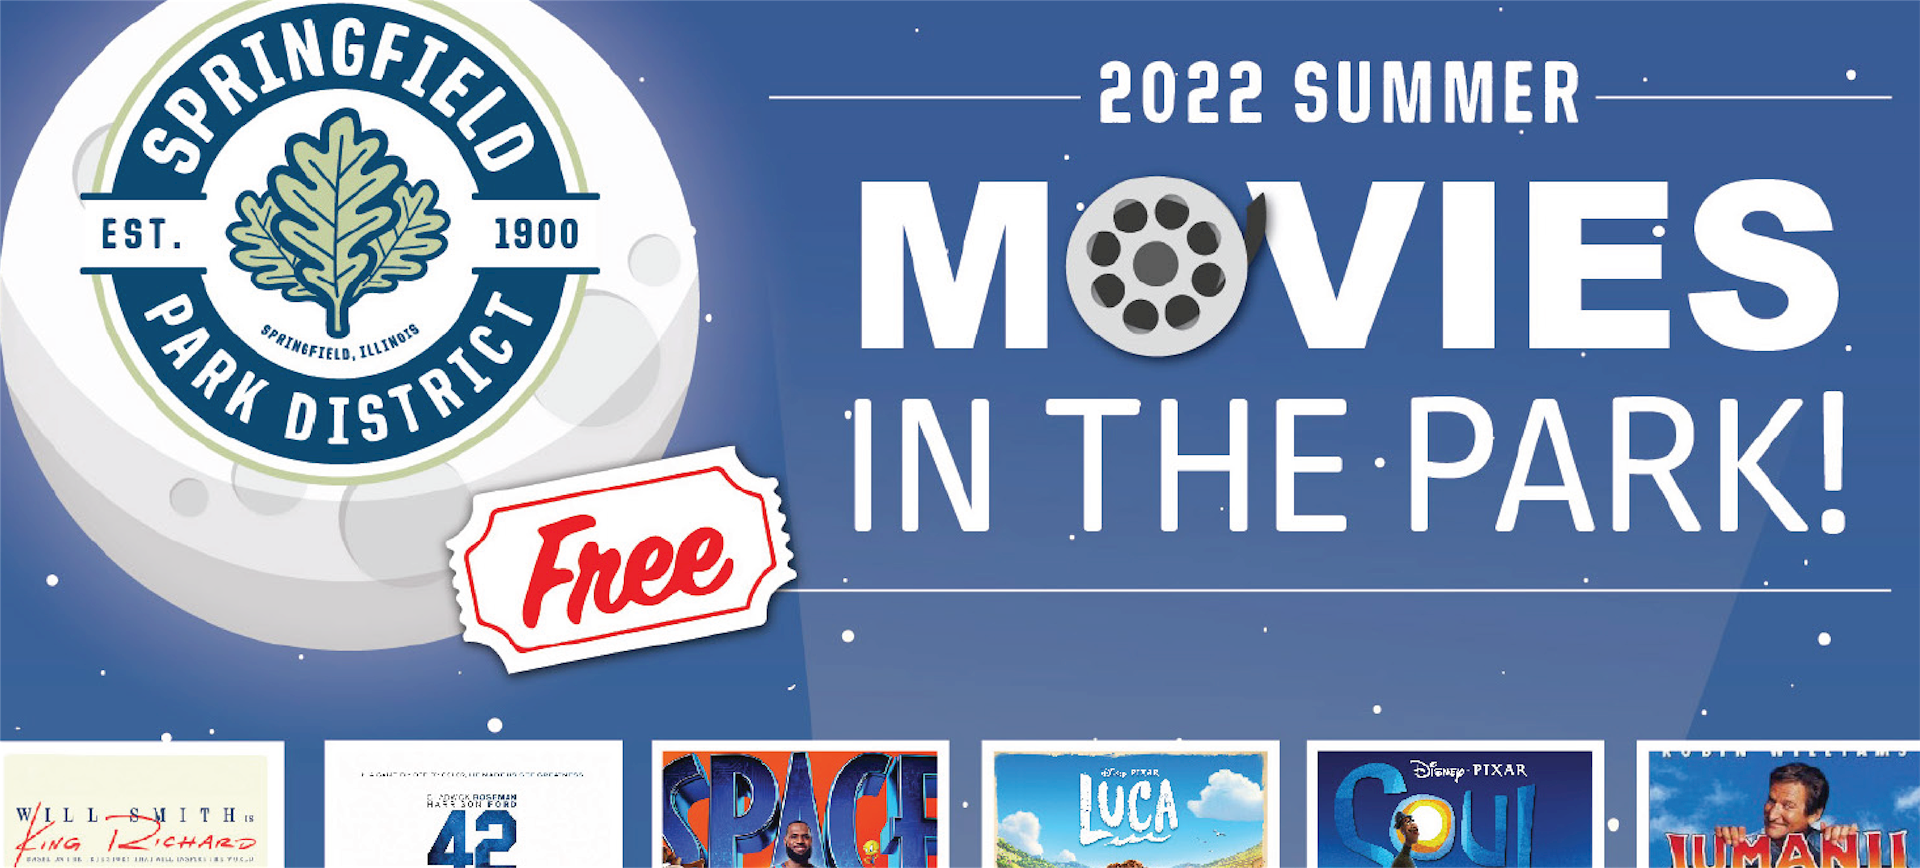 activities_events_page_banner_image_movies_in_park.png